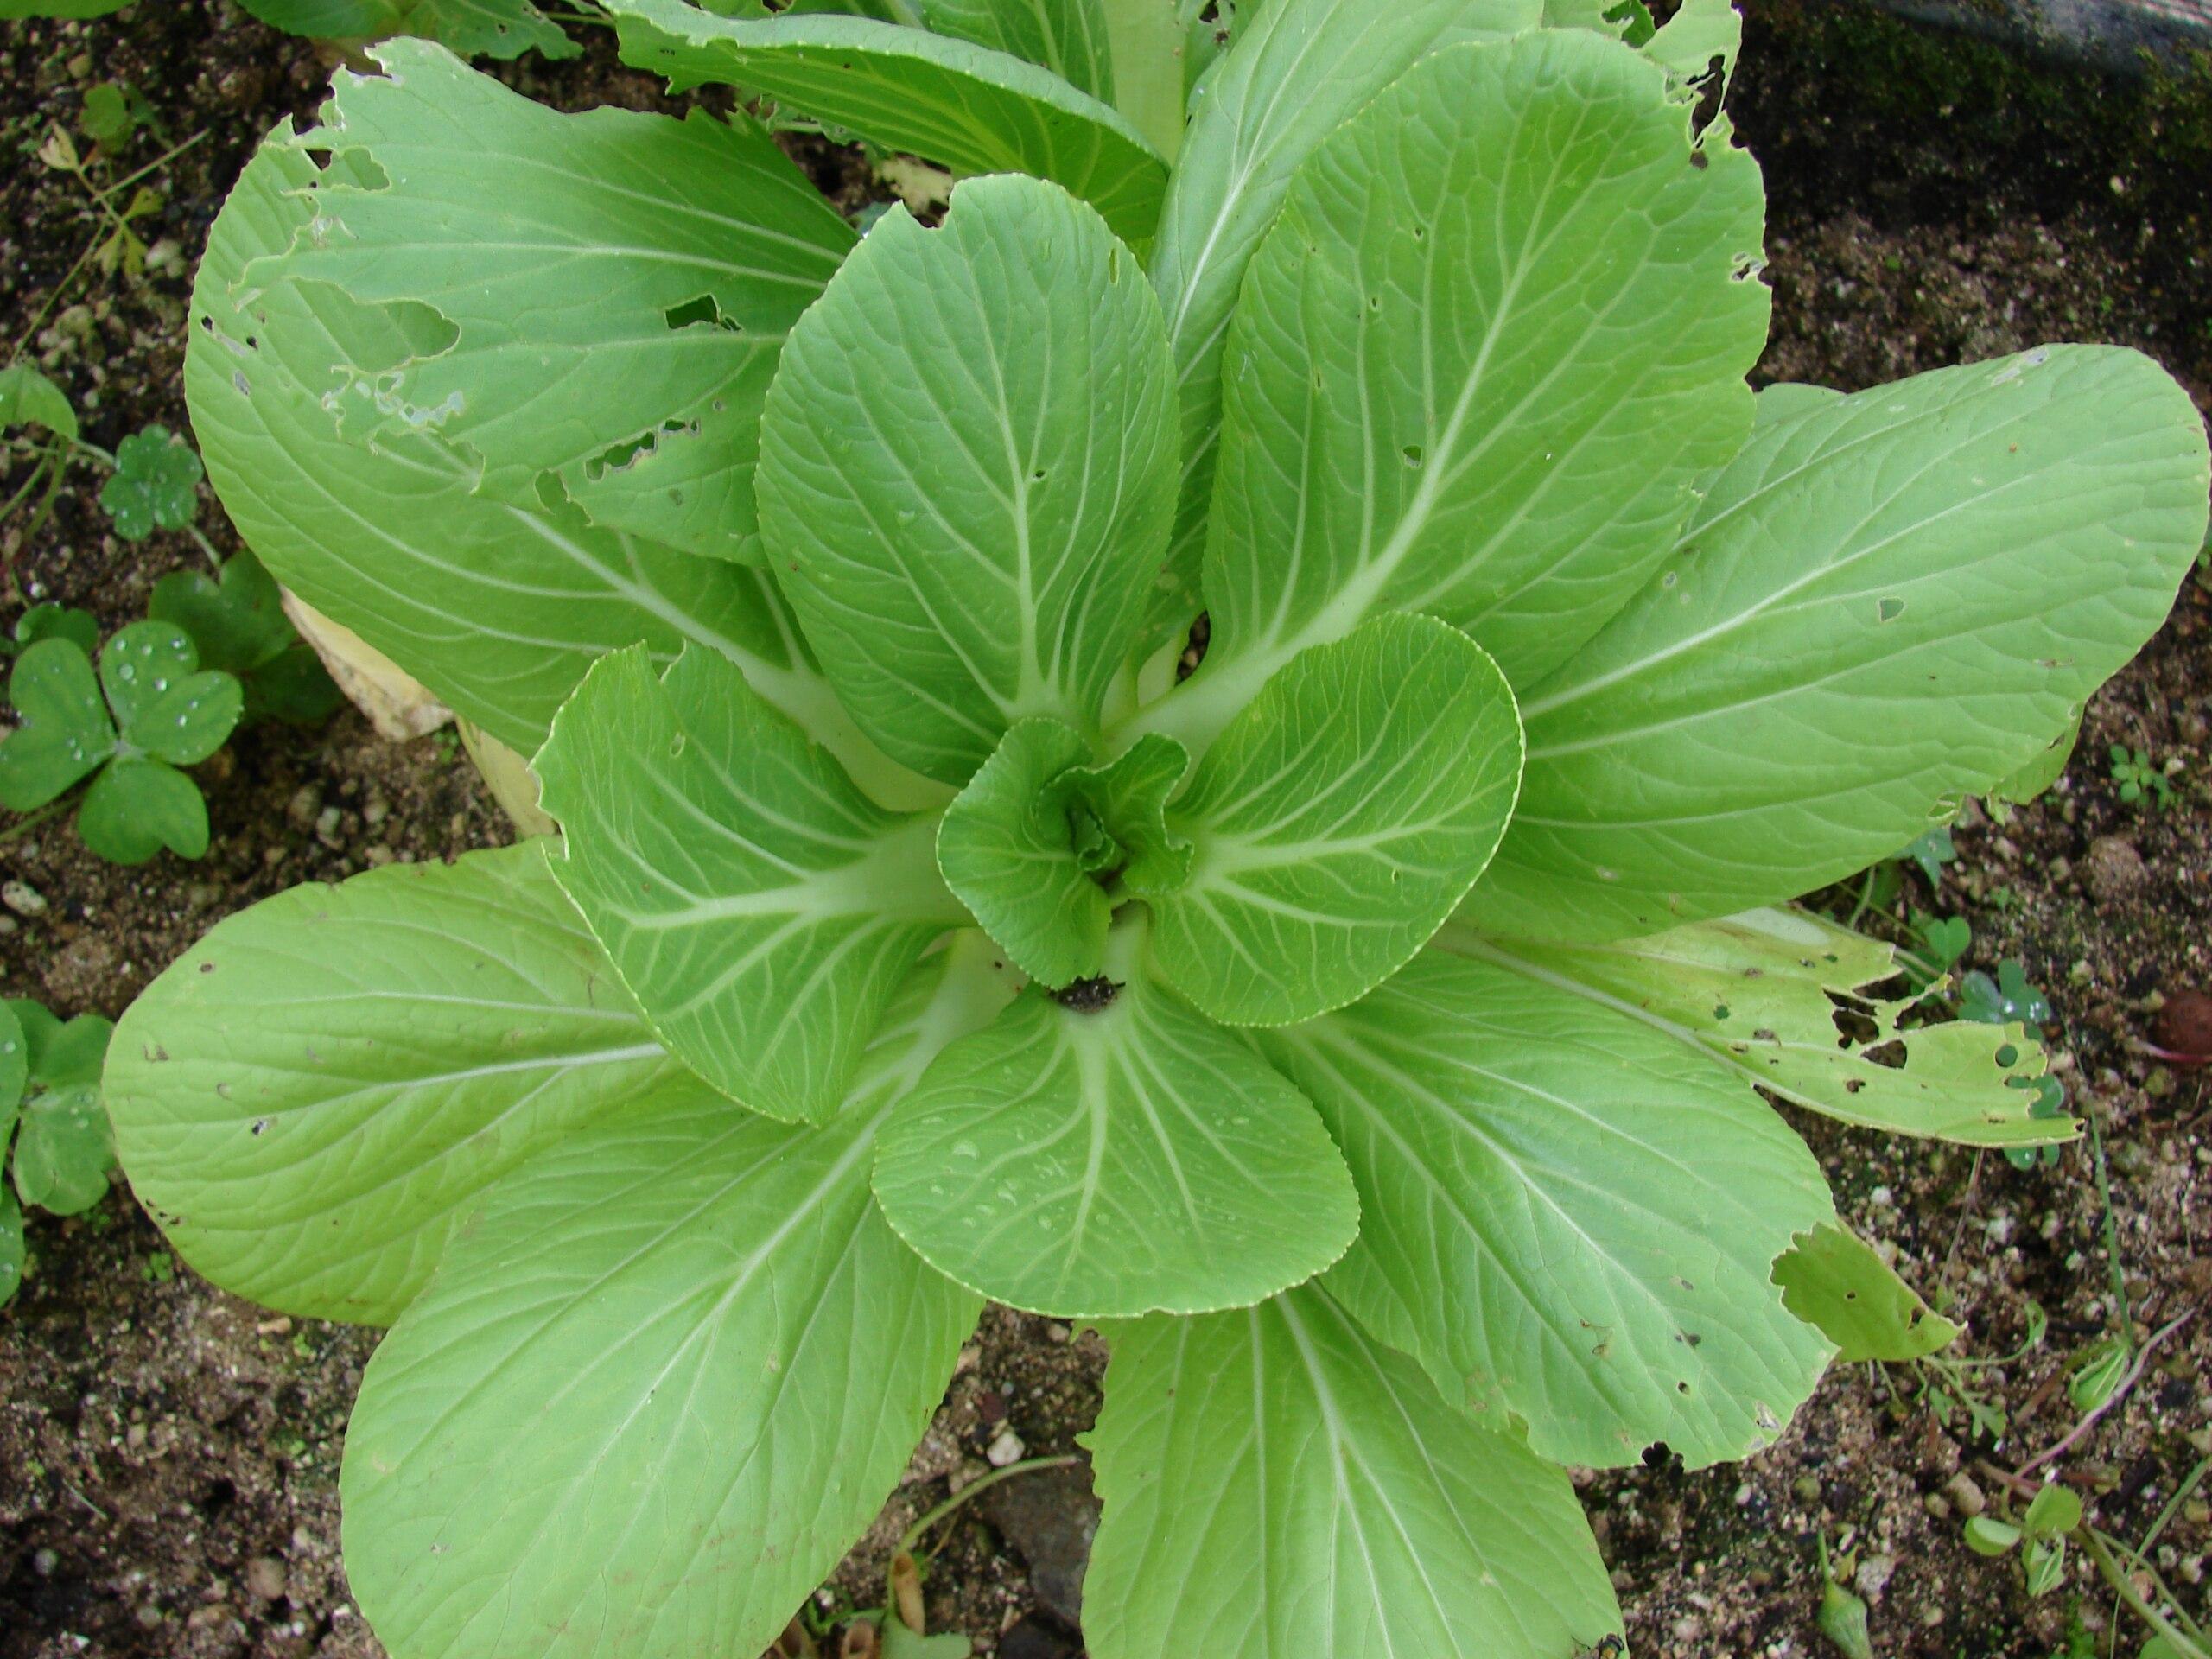 Lime-green leaves with pale-green midrib and veins